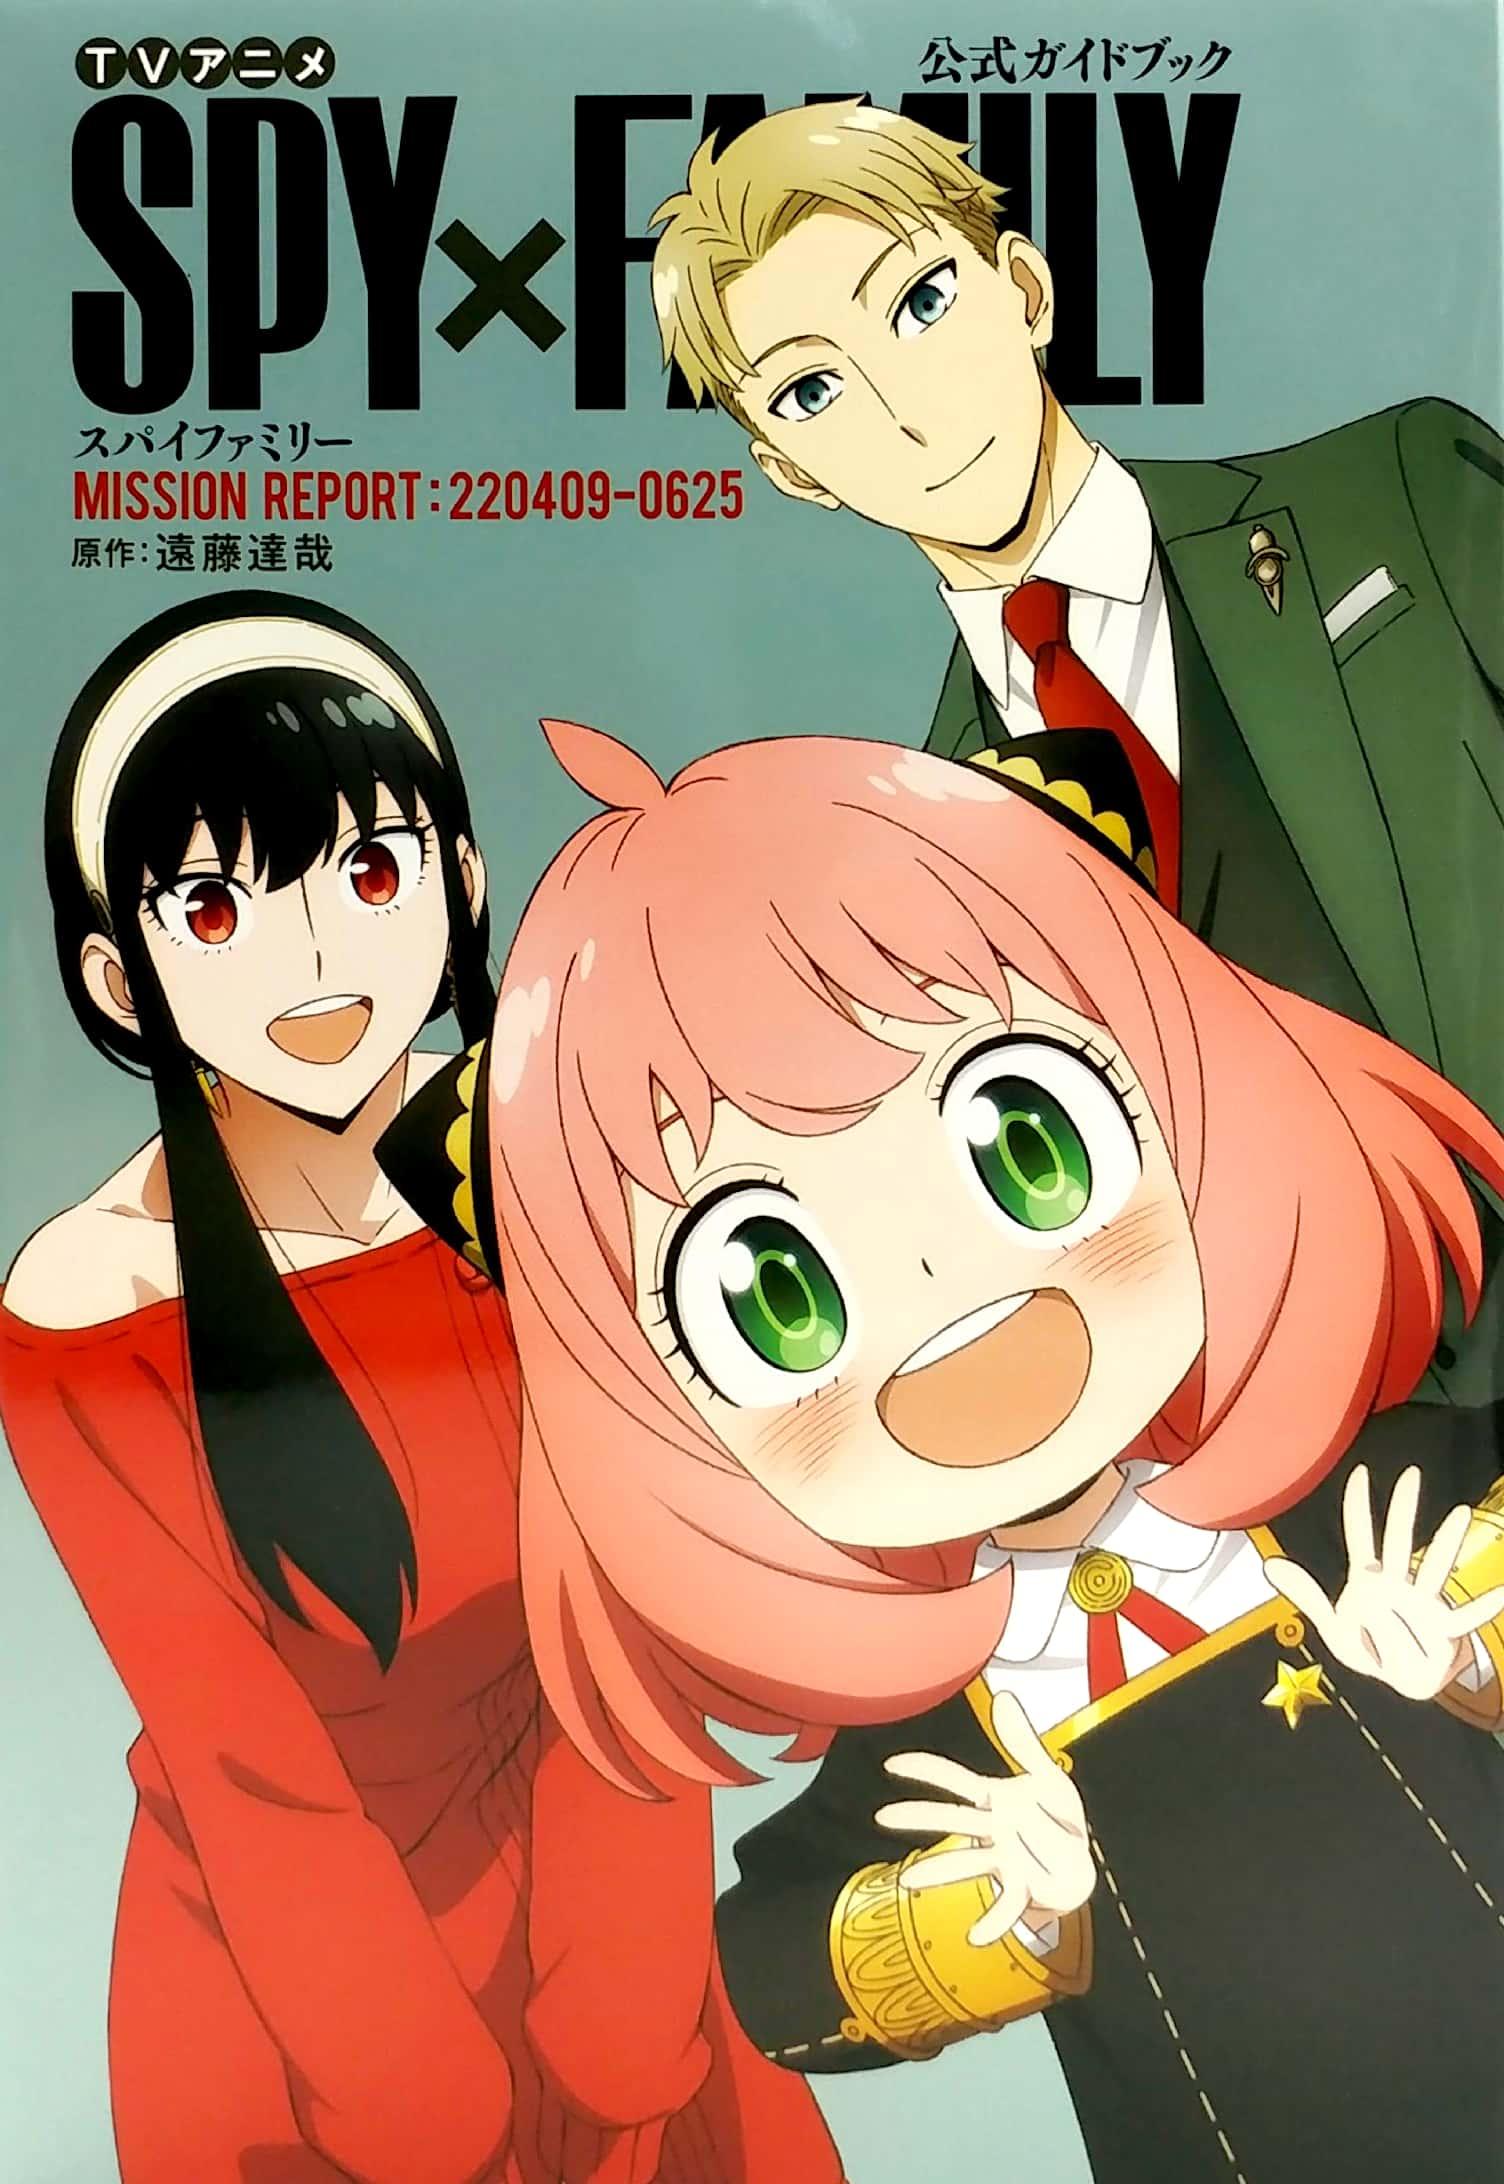 TV Anime Spy x Family Official Guidebook Mission Report (Japanese Edition)